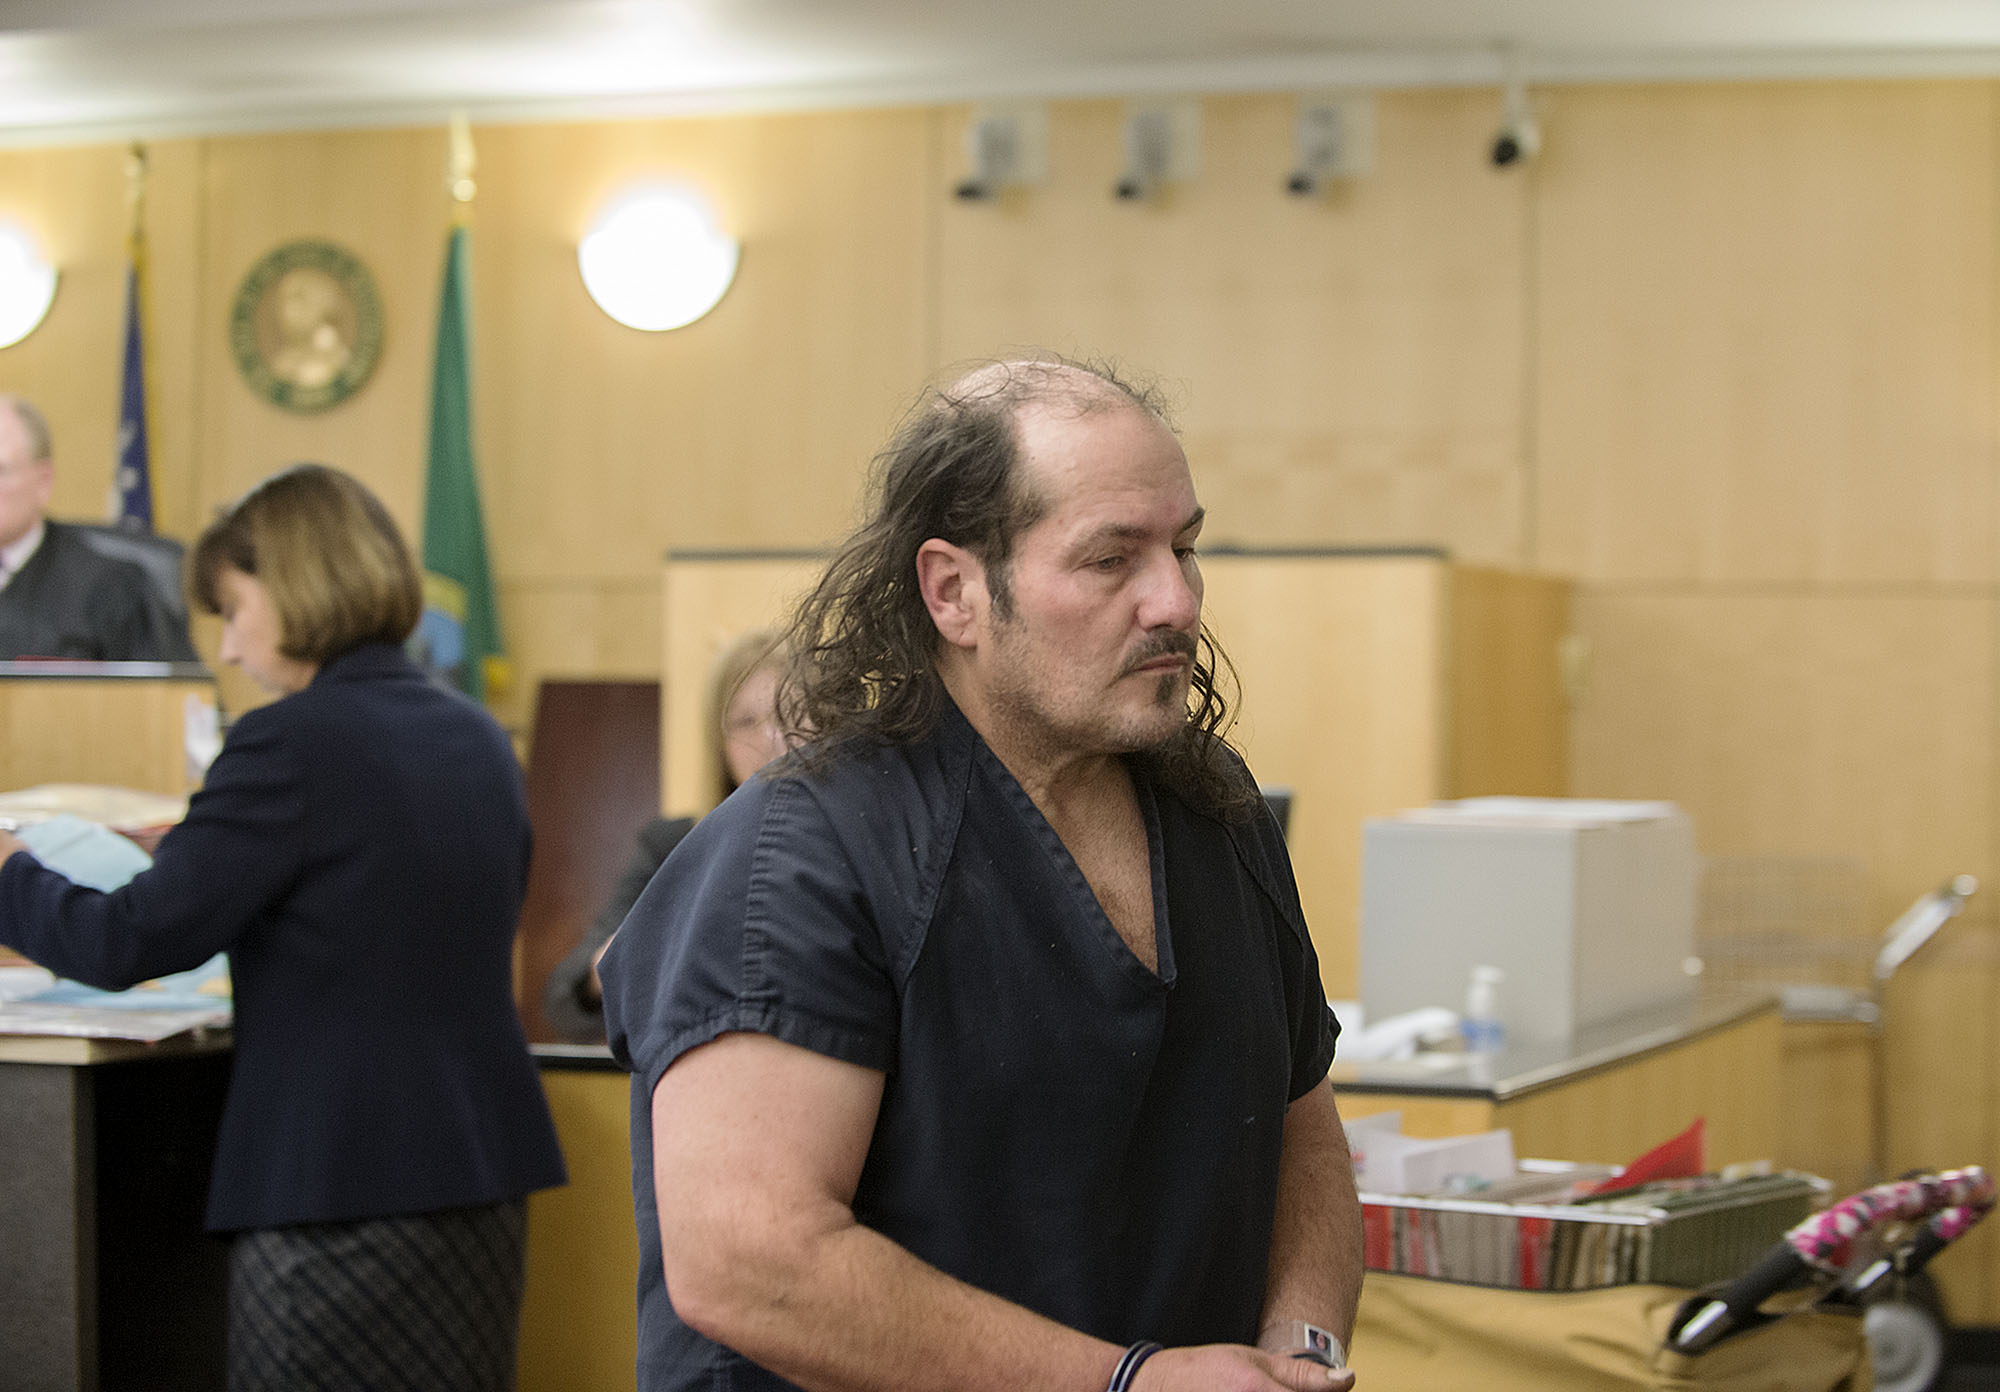 William Gregory Rathgeber makes a first appearance on multiple drug and firearms allegations in Clark County Superior Court on Monday morning, Nov. 21, 2016.